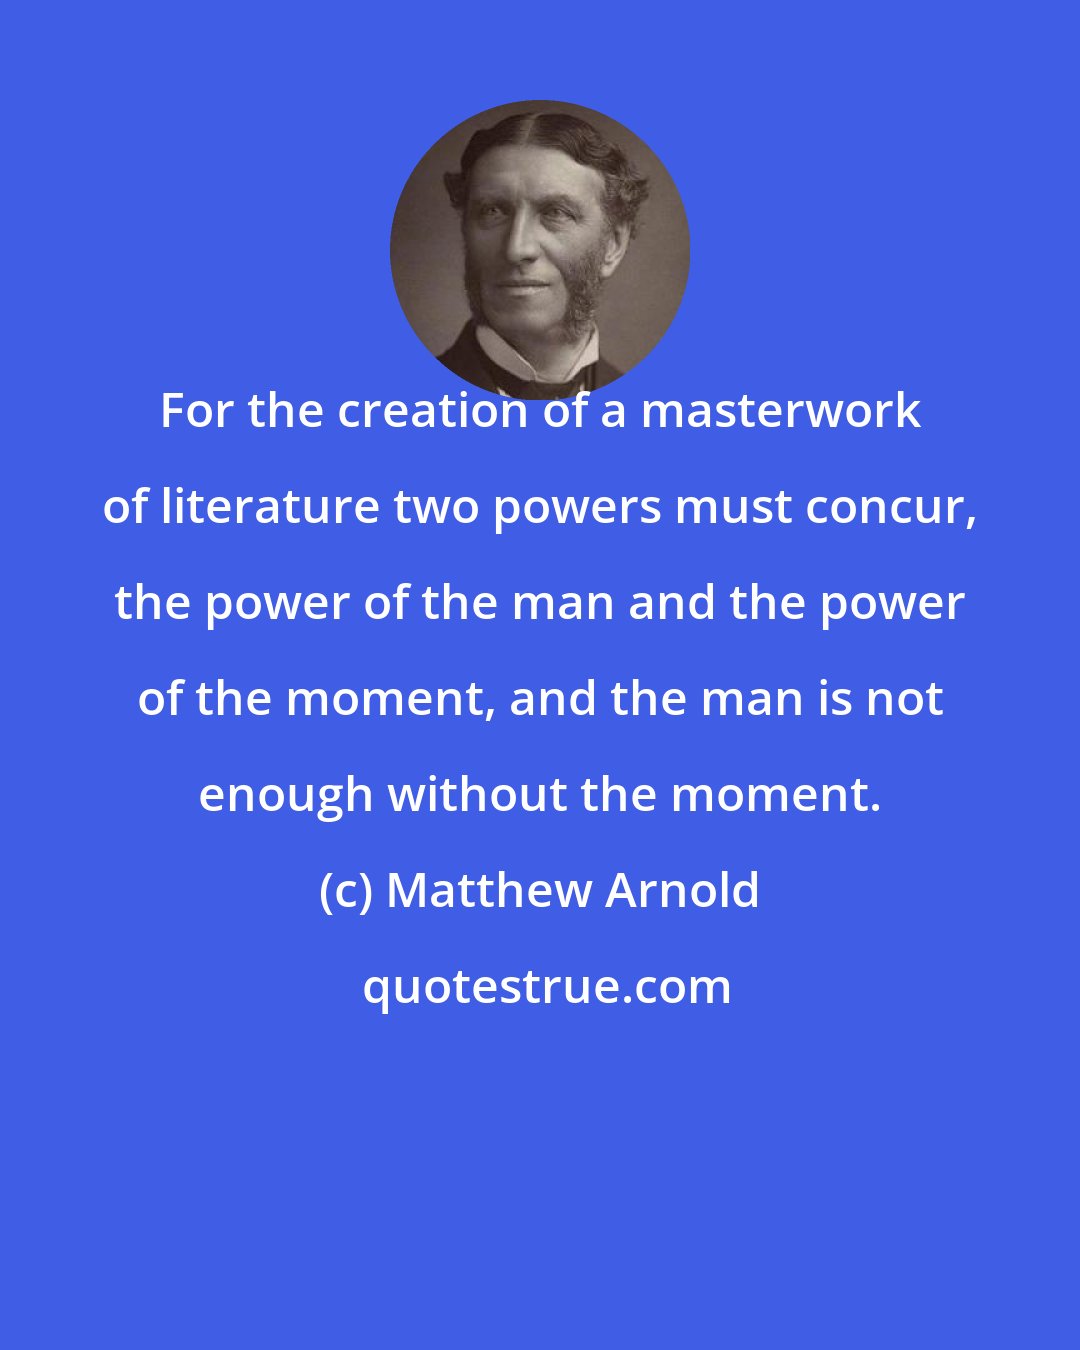 Matthew Arnold: For the creation of a masterwork of literature two powers must concur, the power of the man and the power of the moment, and the man is not enough without the moment.